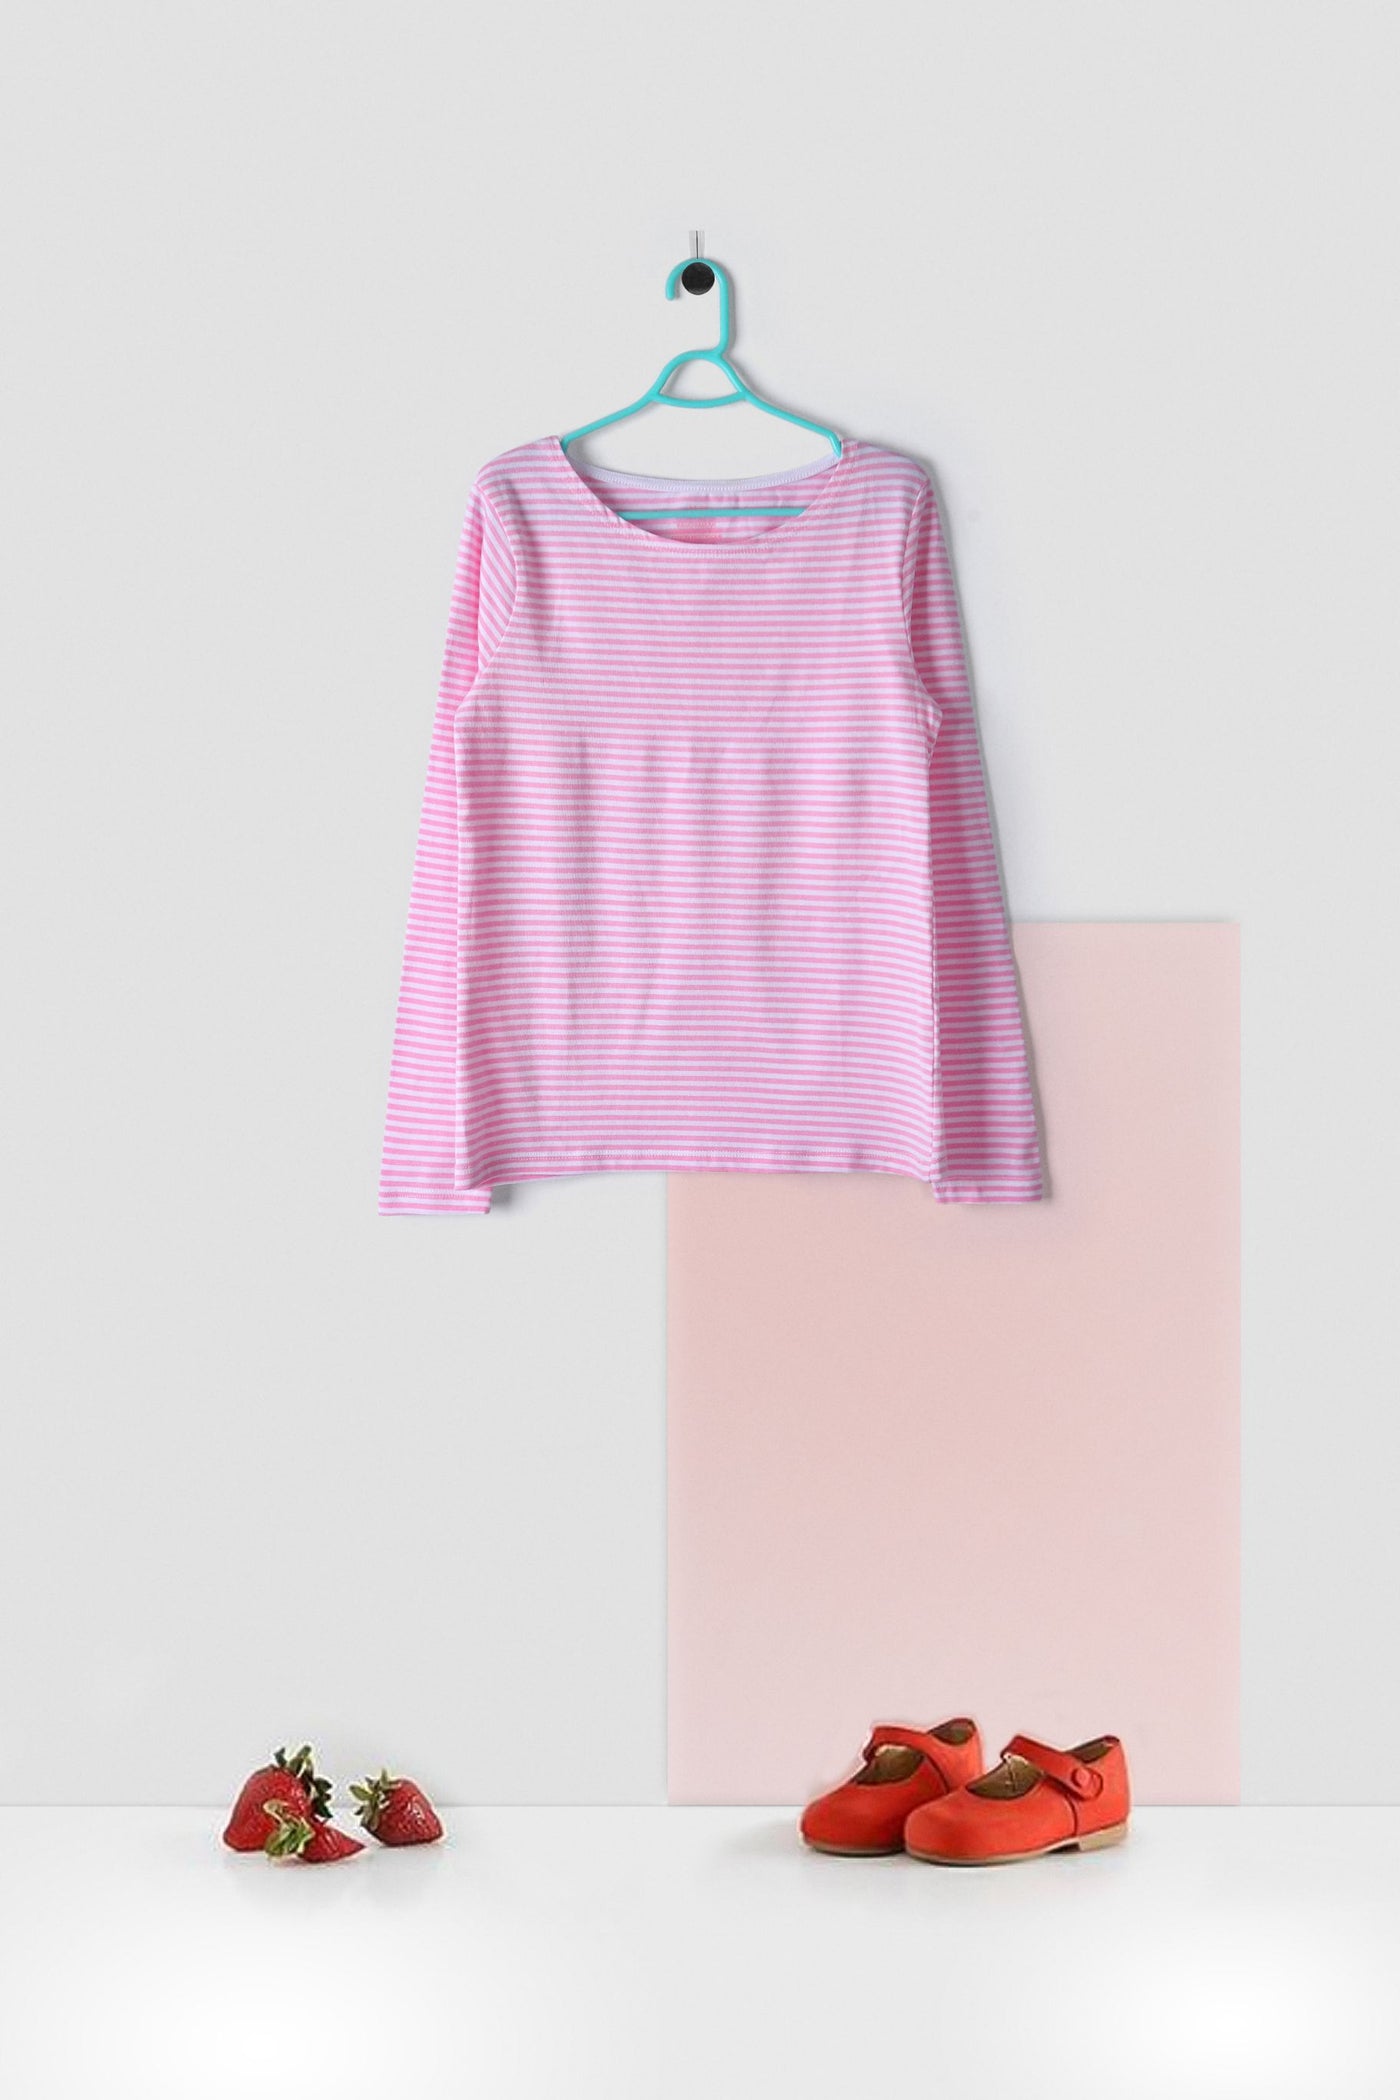 PINK LINED H&M COTTON SHIRT